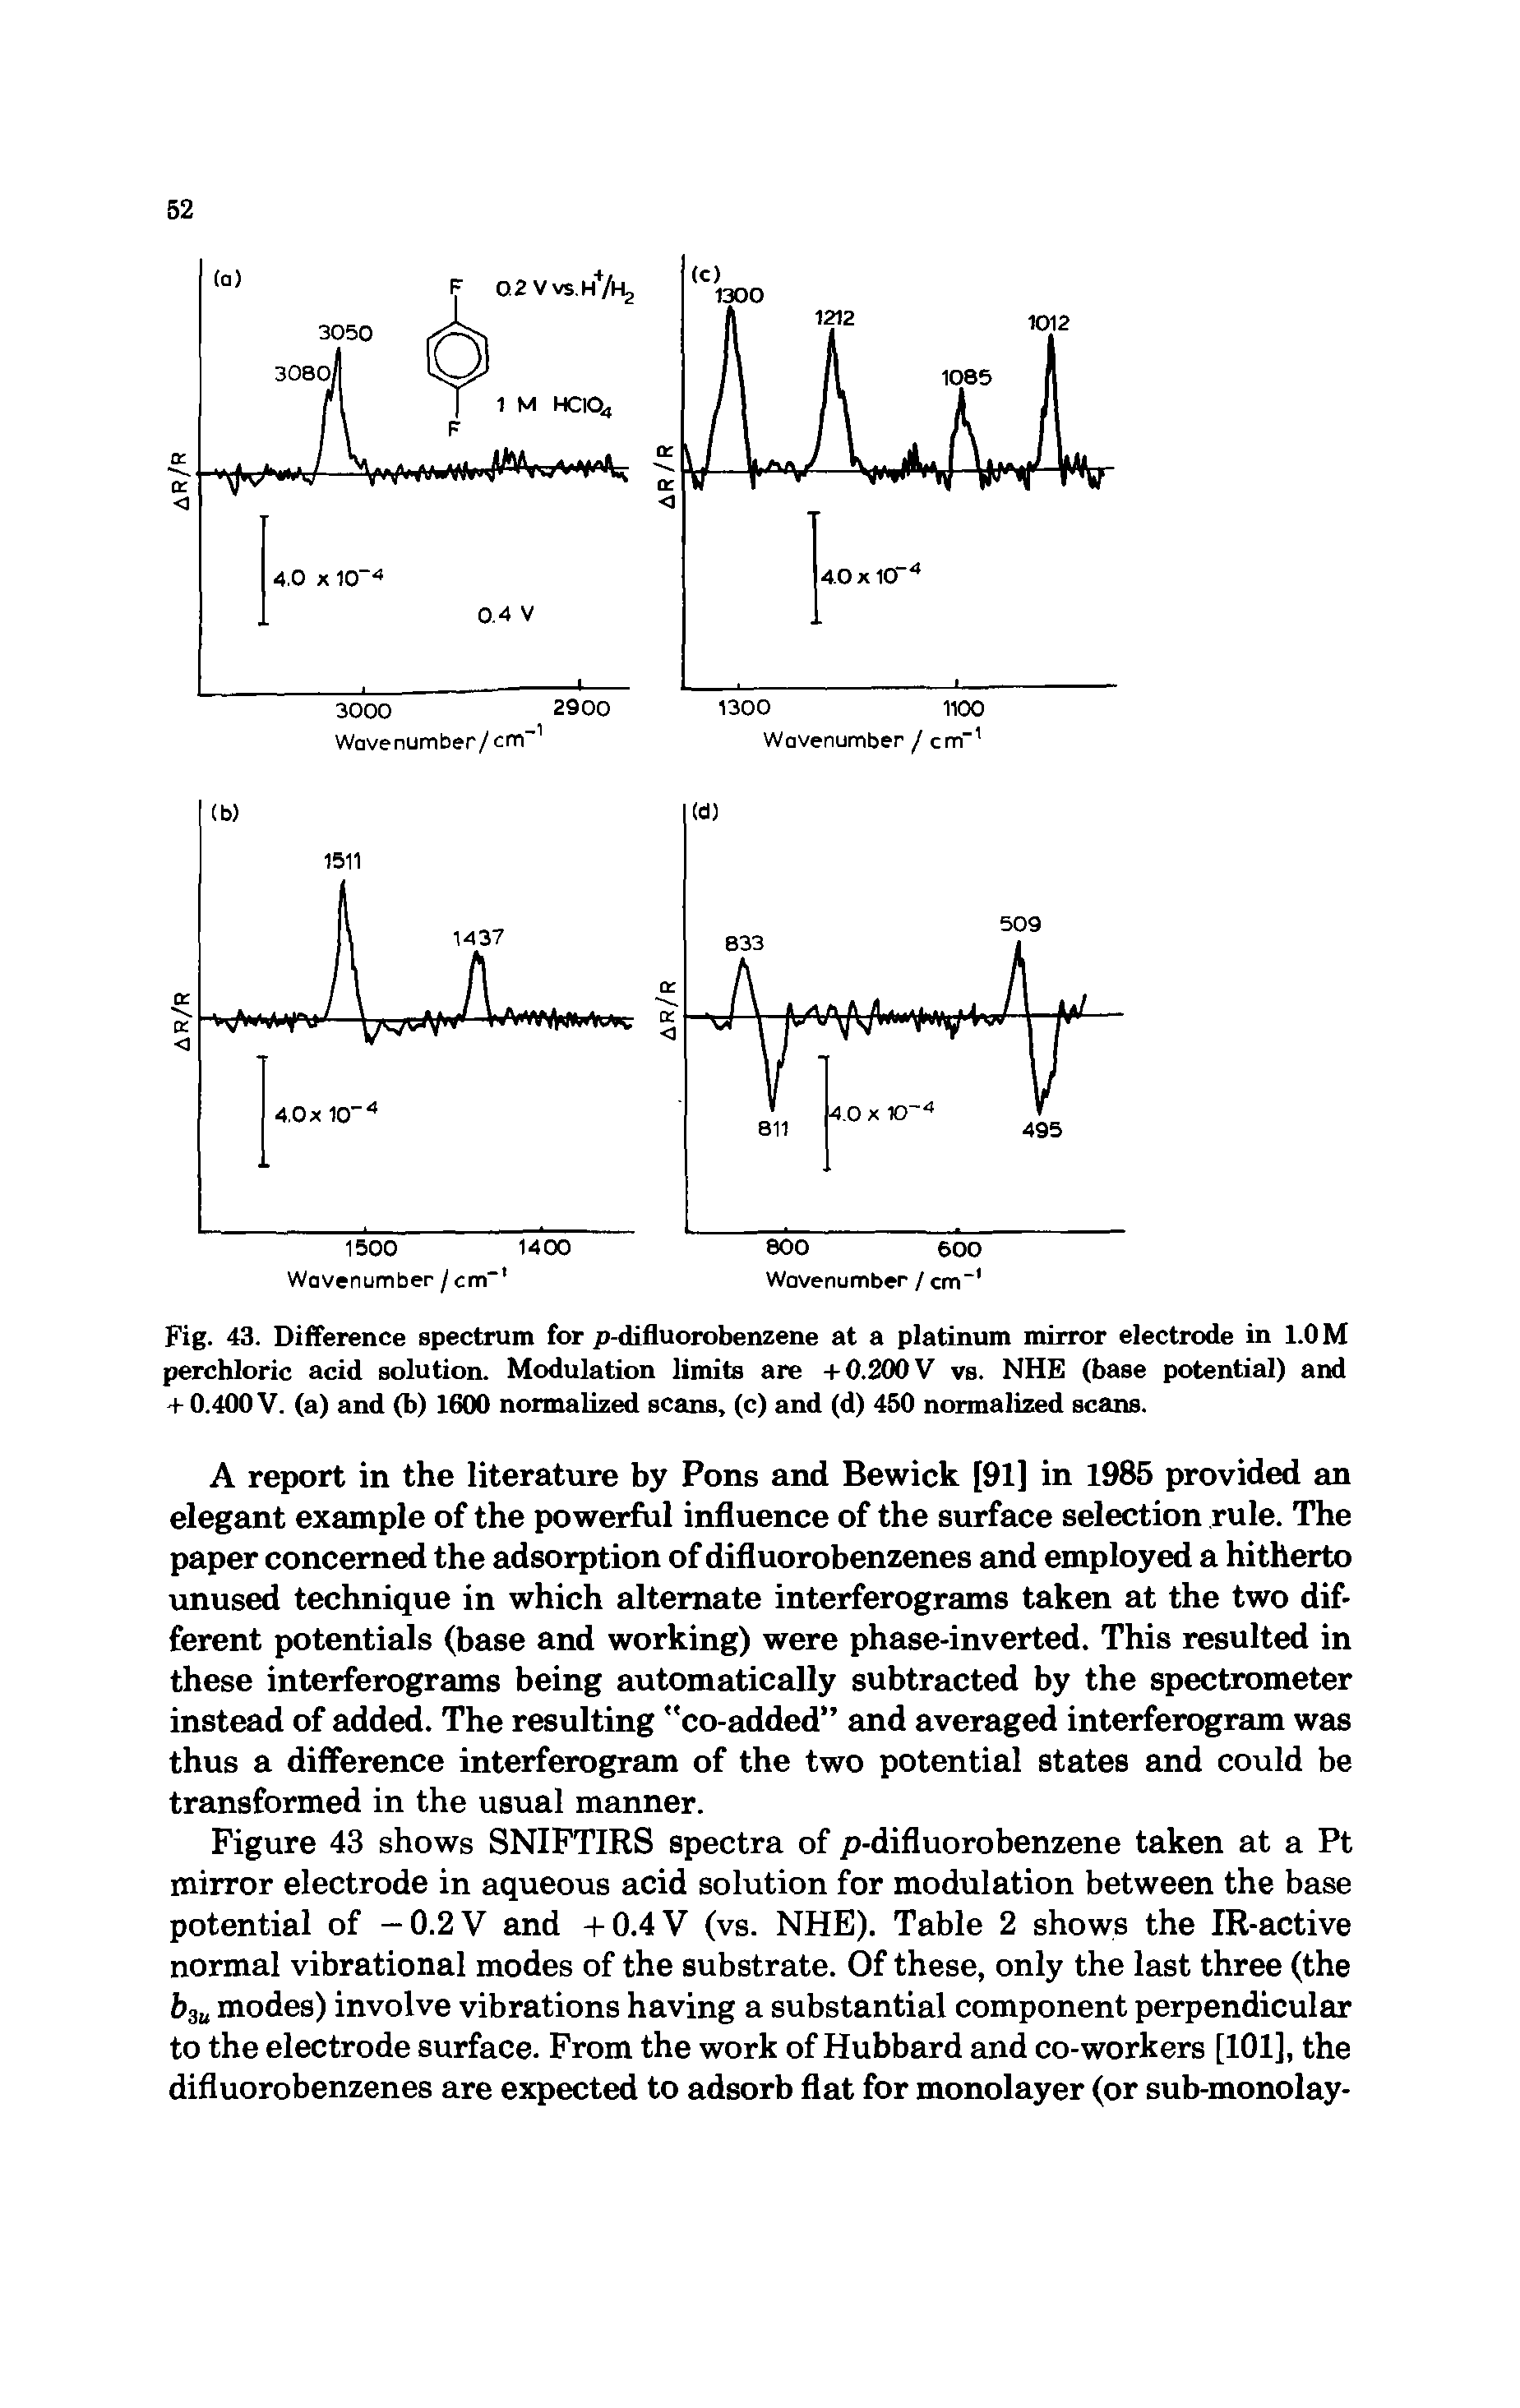 Fig. 43. Difference spectrum for p-difluorobenzene at a platinum mirror electrode in 1.0 M perchloric acid solution. Modulation limits are + 0.200 V vs. NHE (base potential) and + 0.400 V. (a) and (b) 1600 normalized scans, (c) and (d) 450 normalized scans.